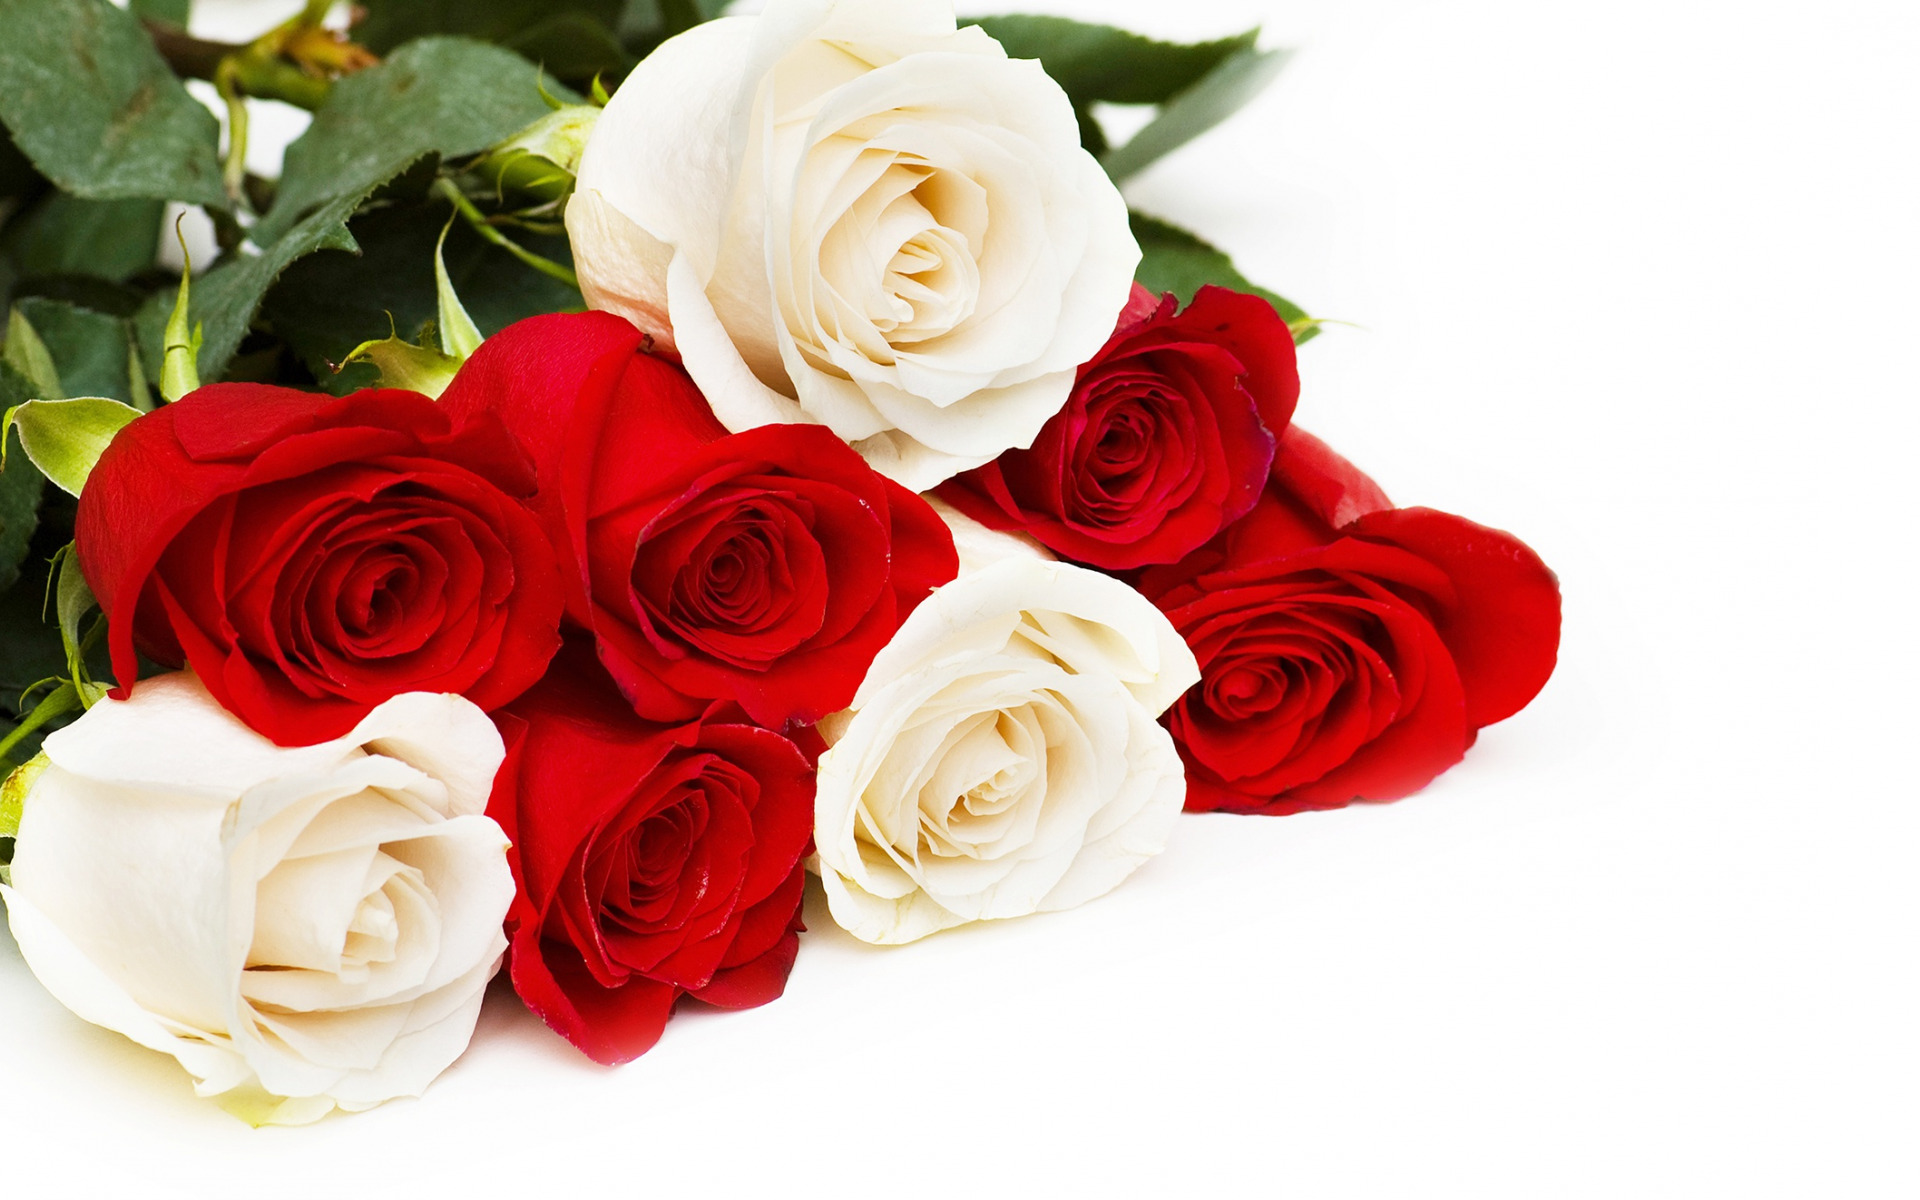 Download wallpapers bouquet of red and white roses, red roses, white